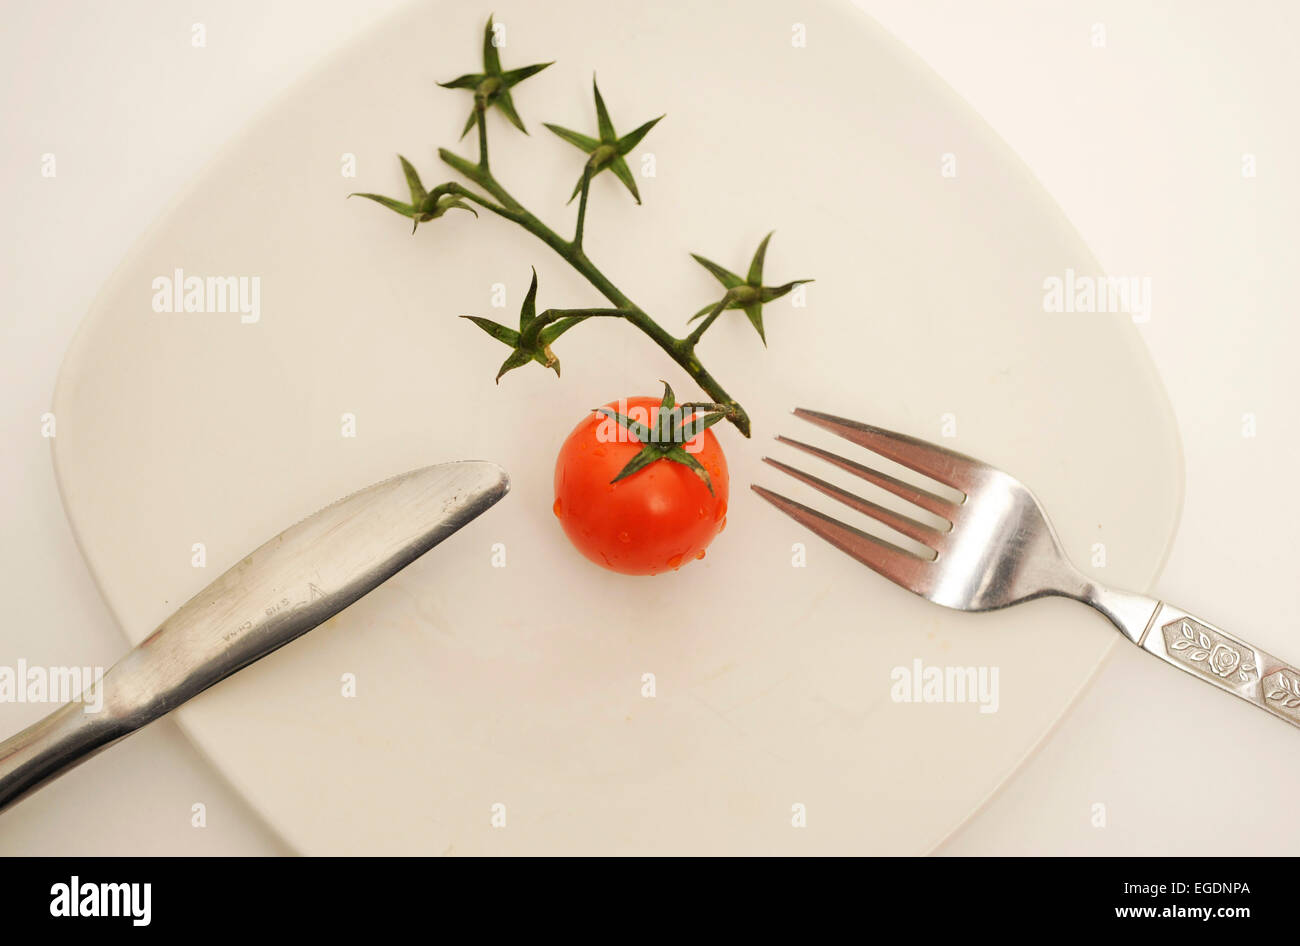 Tomato on Plate with Cutlery Stock Photo